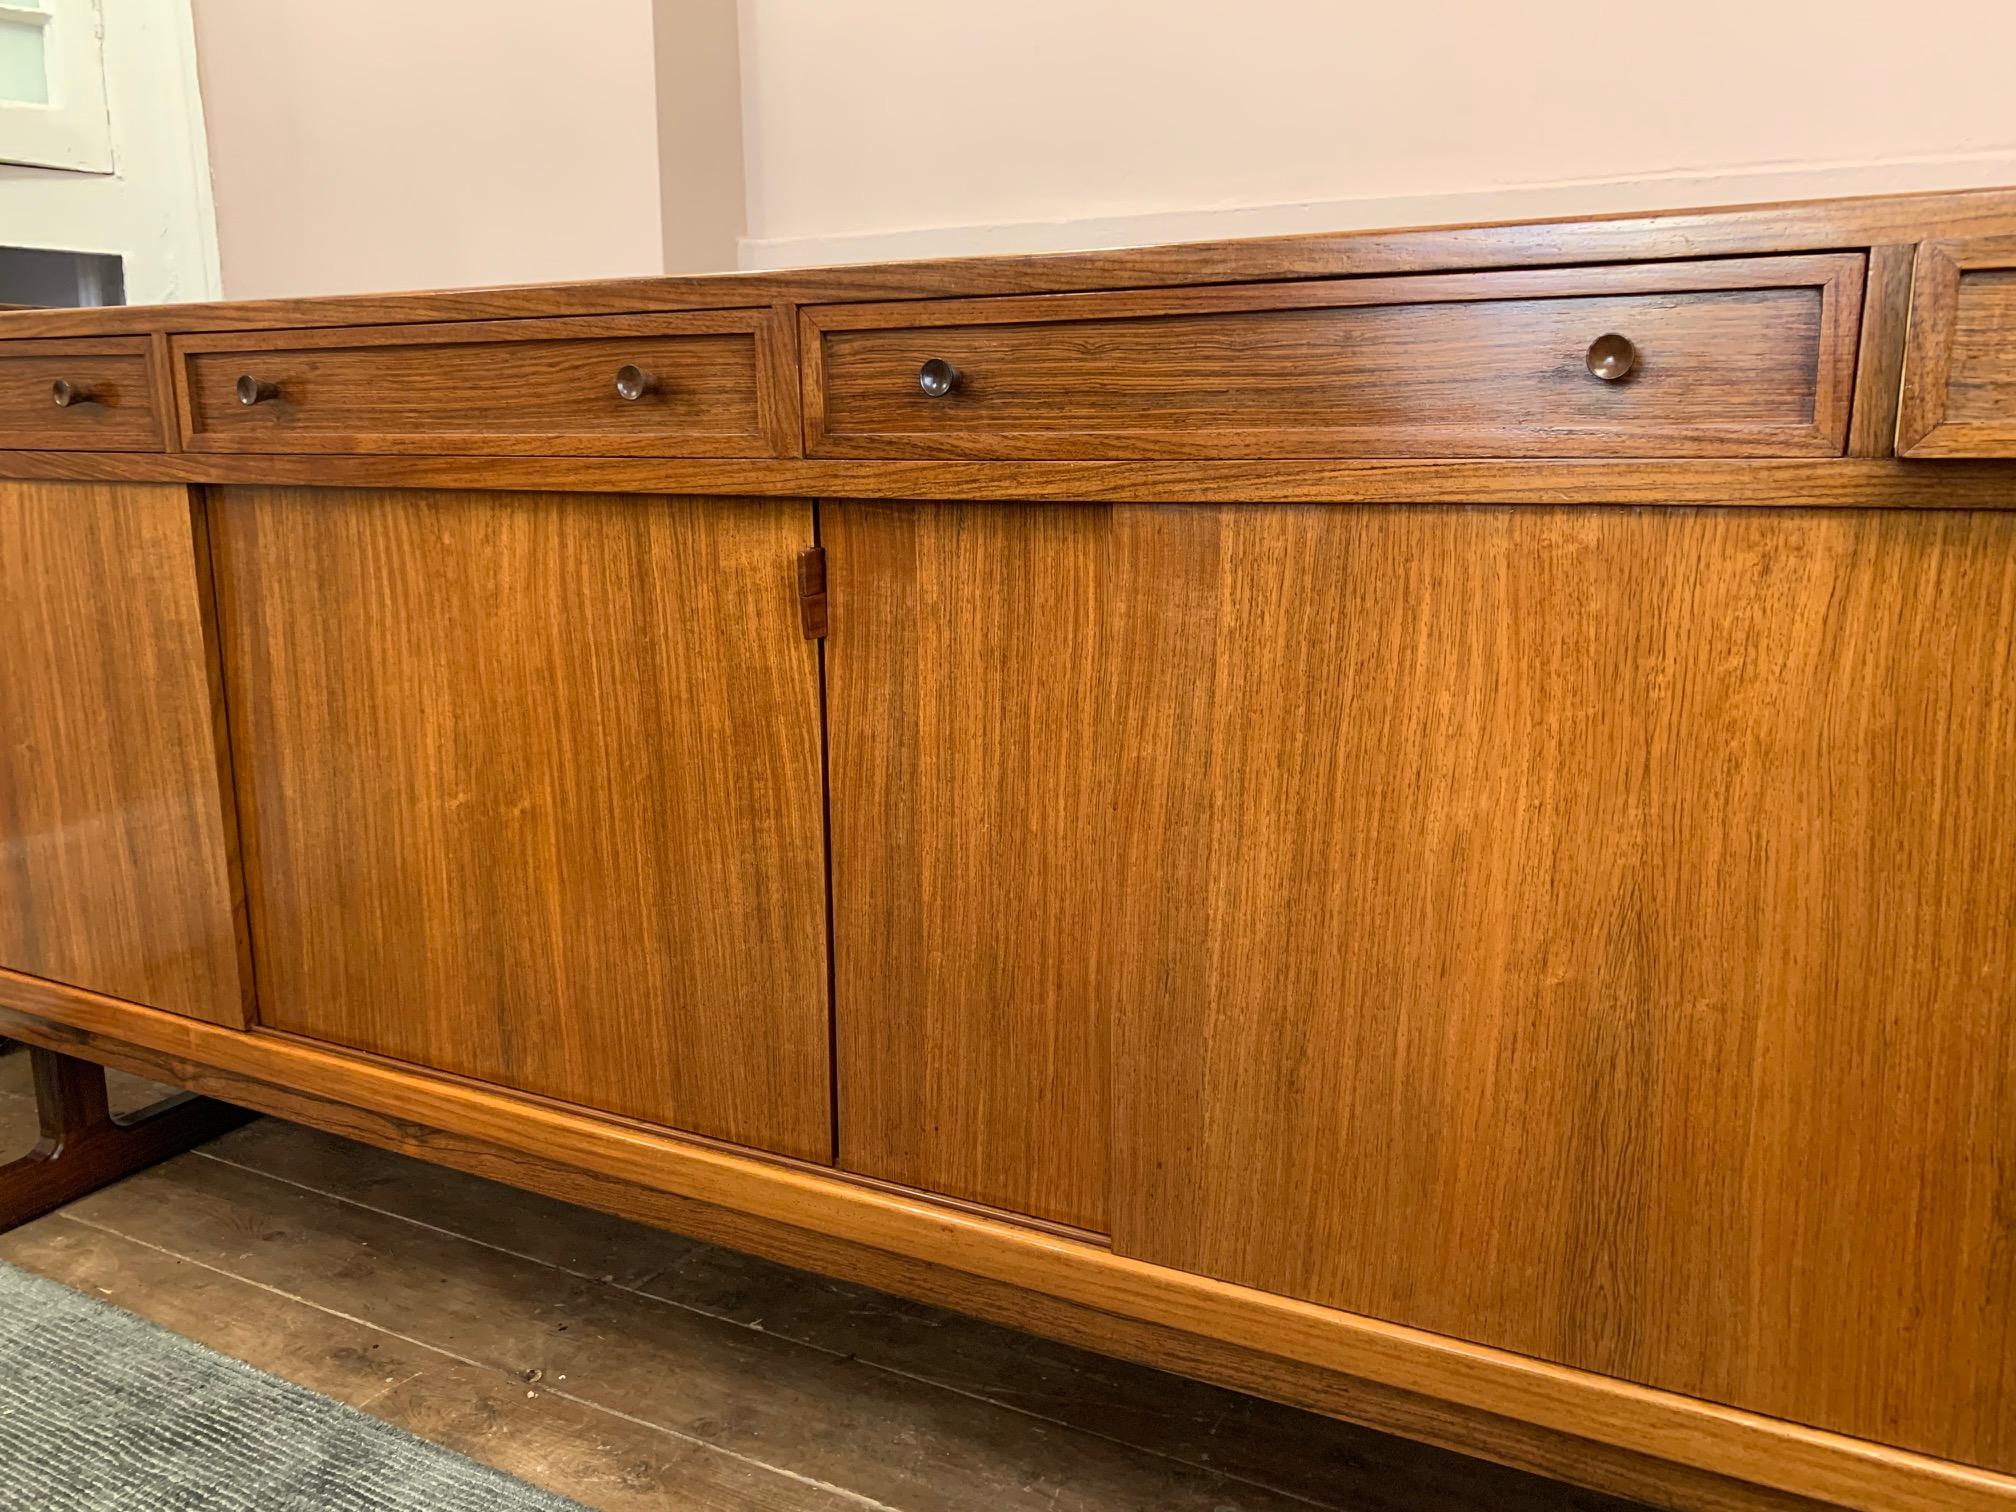 A beautiful large 1960s Danish rosewood sideboard with four individual drawers with two feature turned handles it open each one. The drawers sit over four sliding doors with turned handles on the end panels and an interesting detailed handle on each